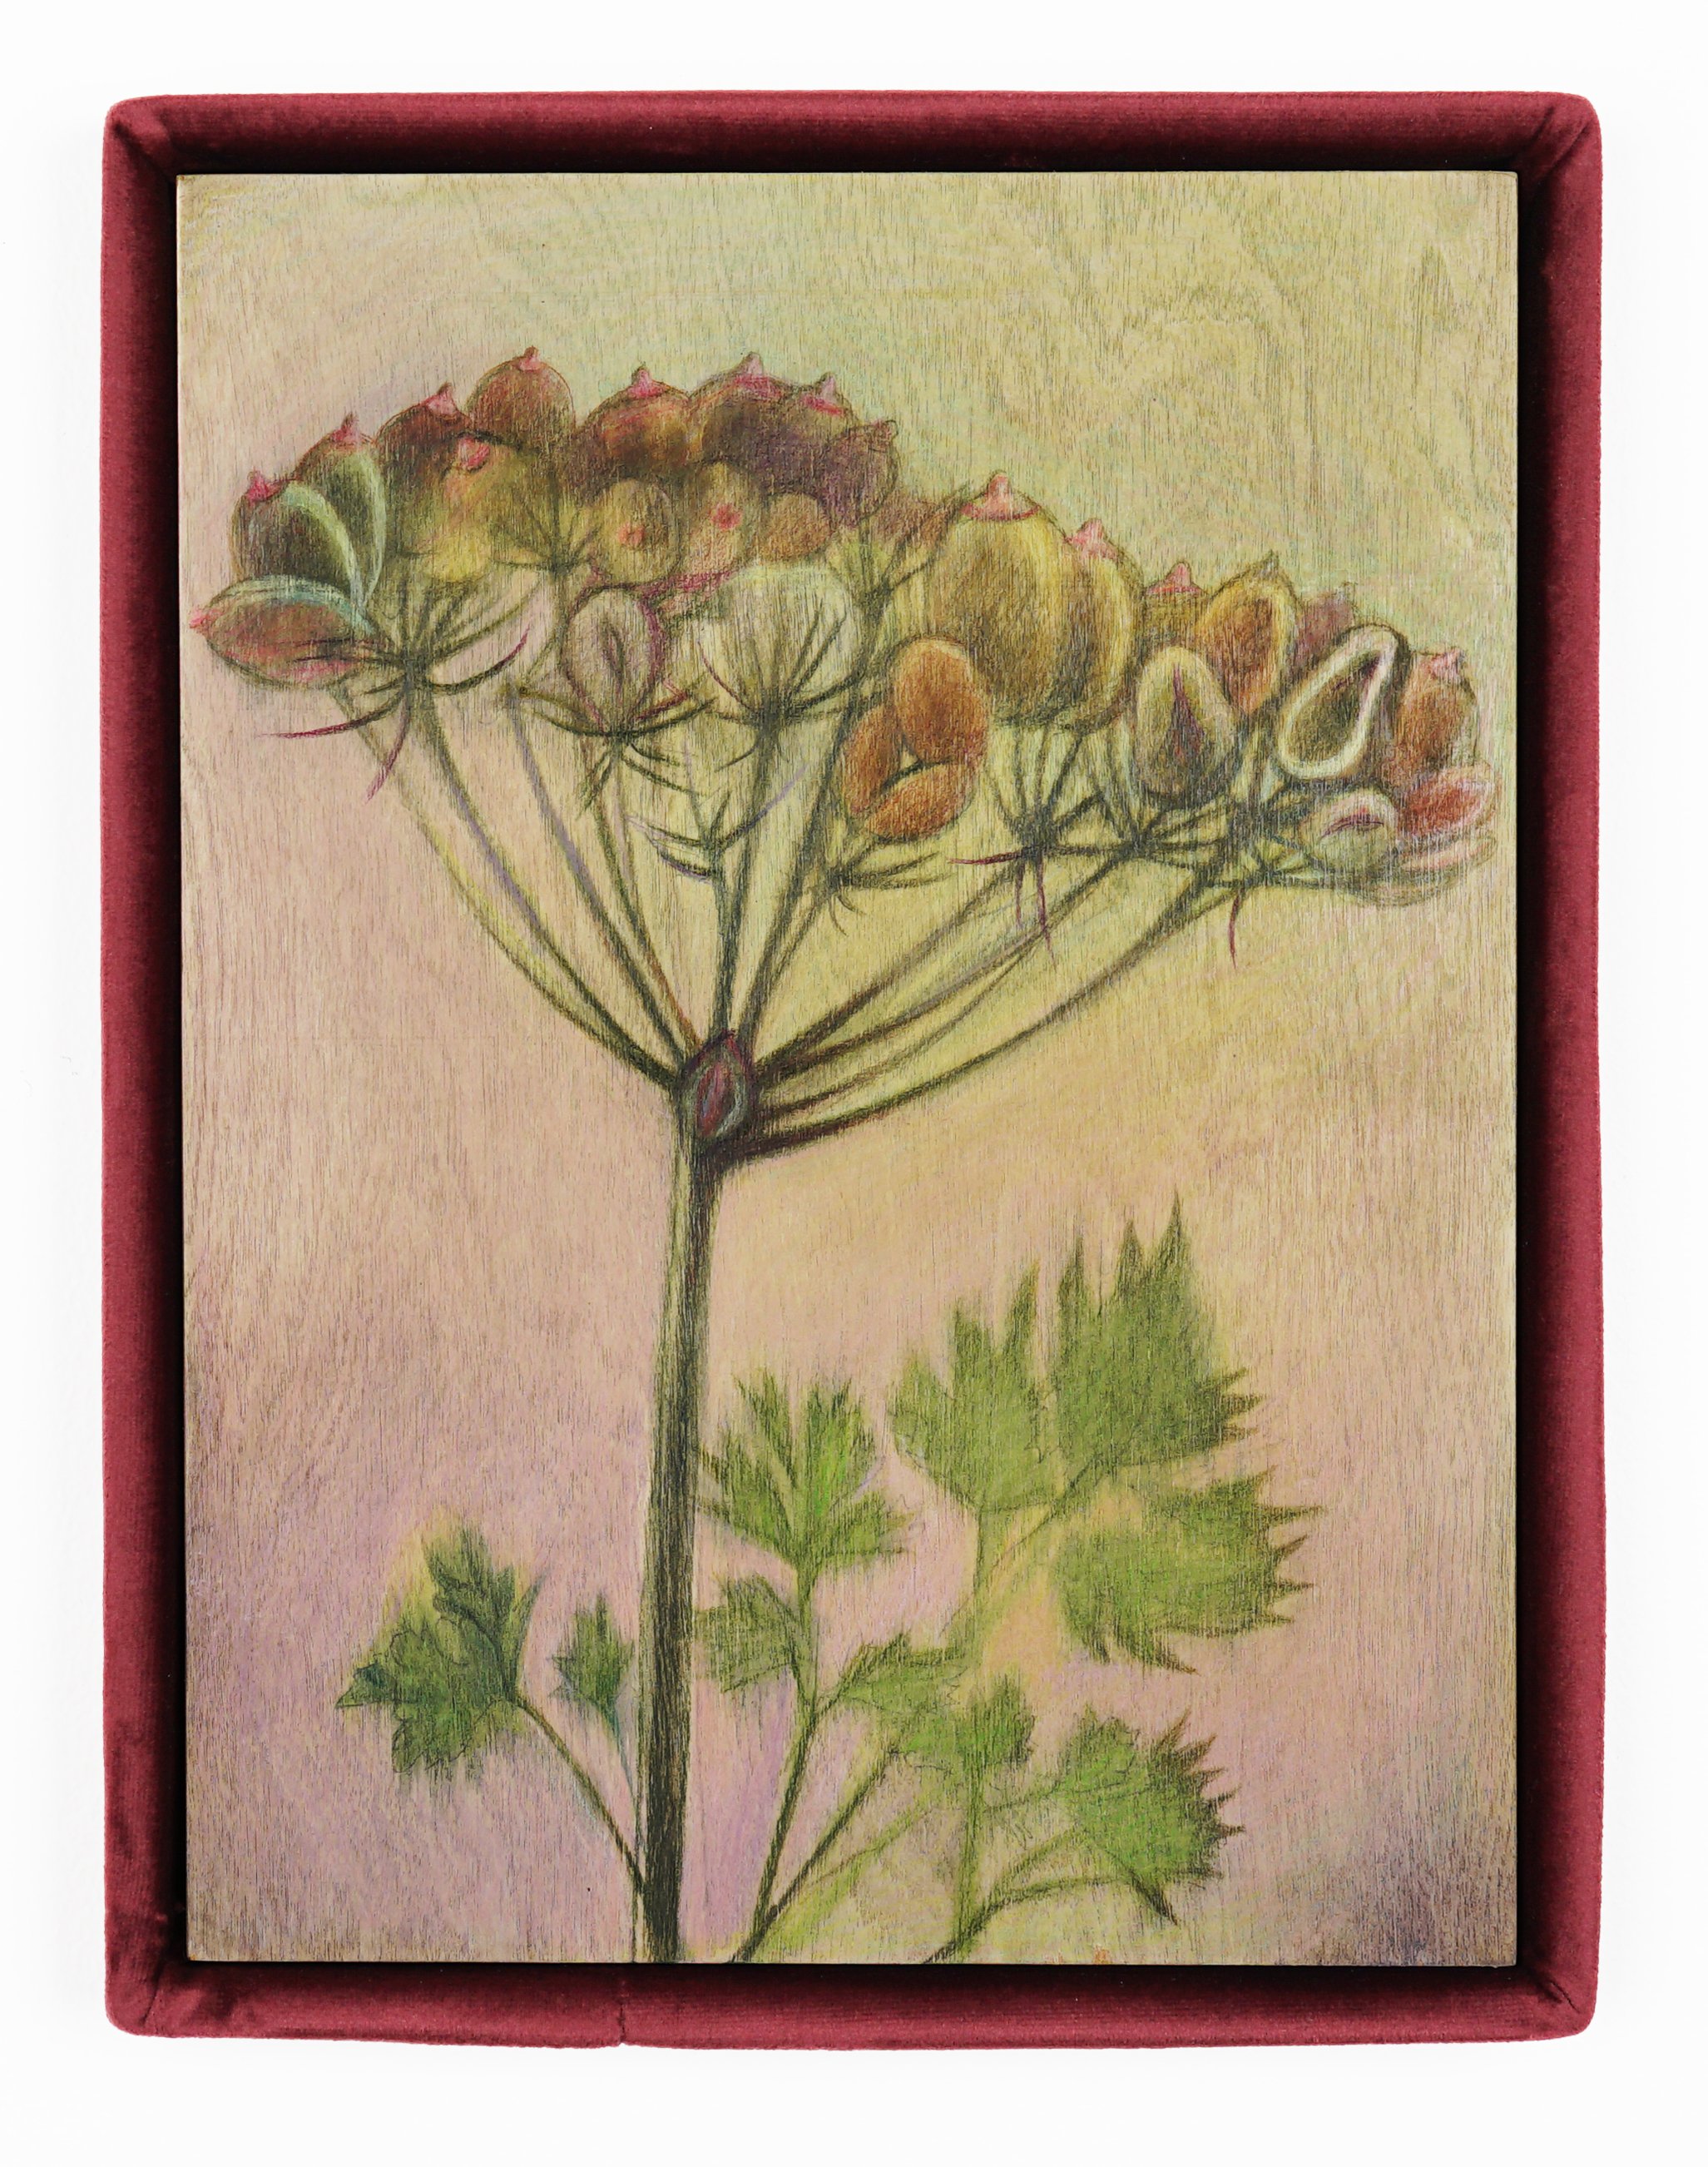  Alina Bliumis  Plant Parenthood, Parsley , 2023 Watercolor, watercolor pencil on wood panel, artist’s velvet frame 13.5 x 10.5 x 1.5 inches 